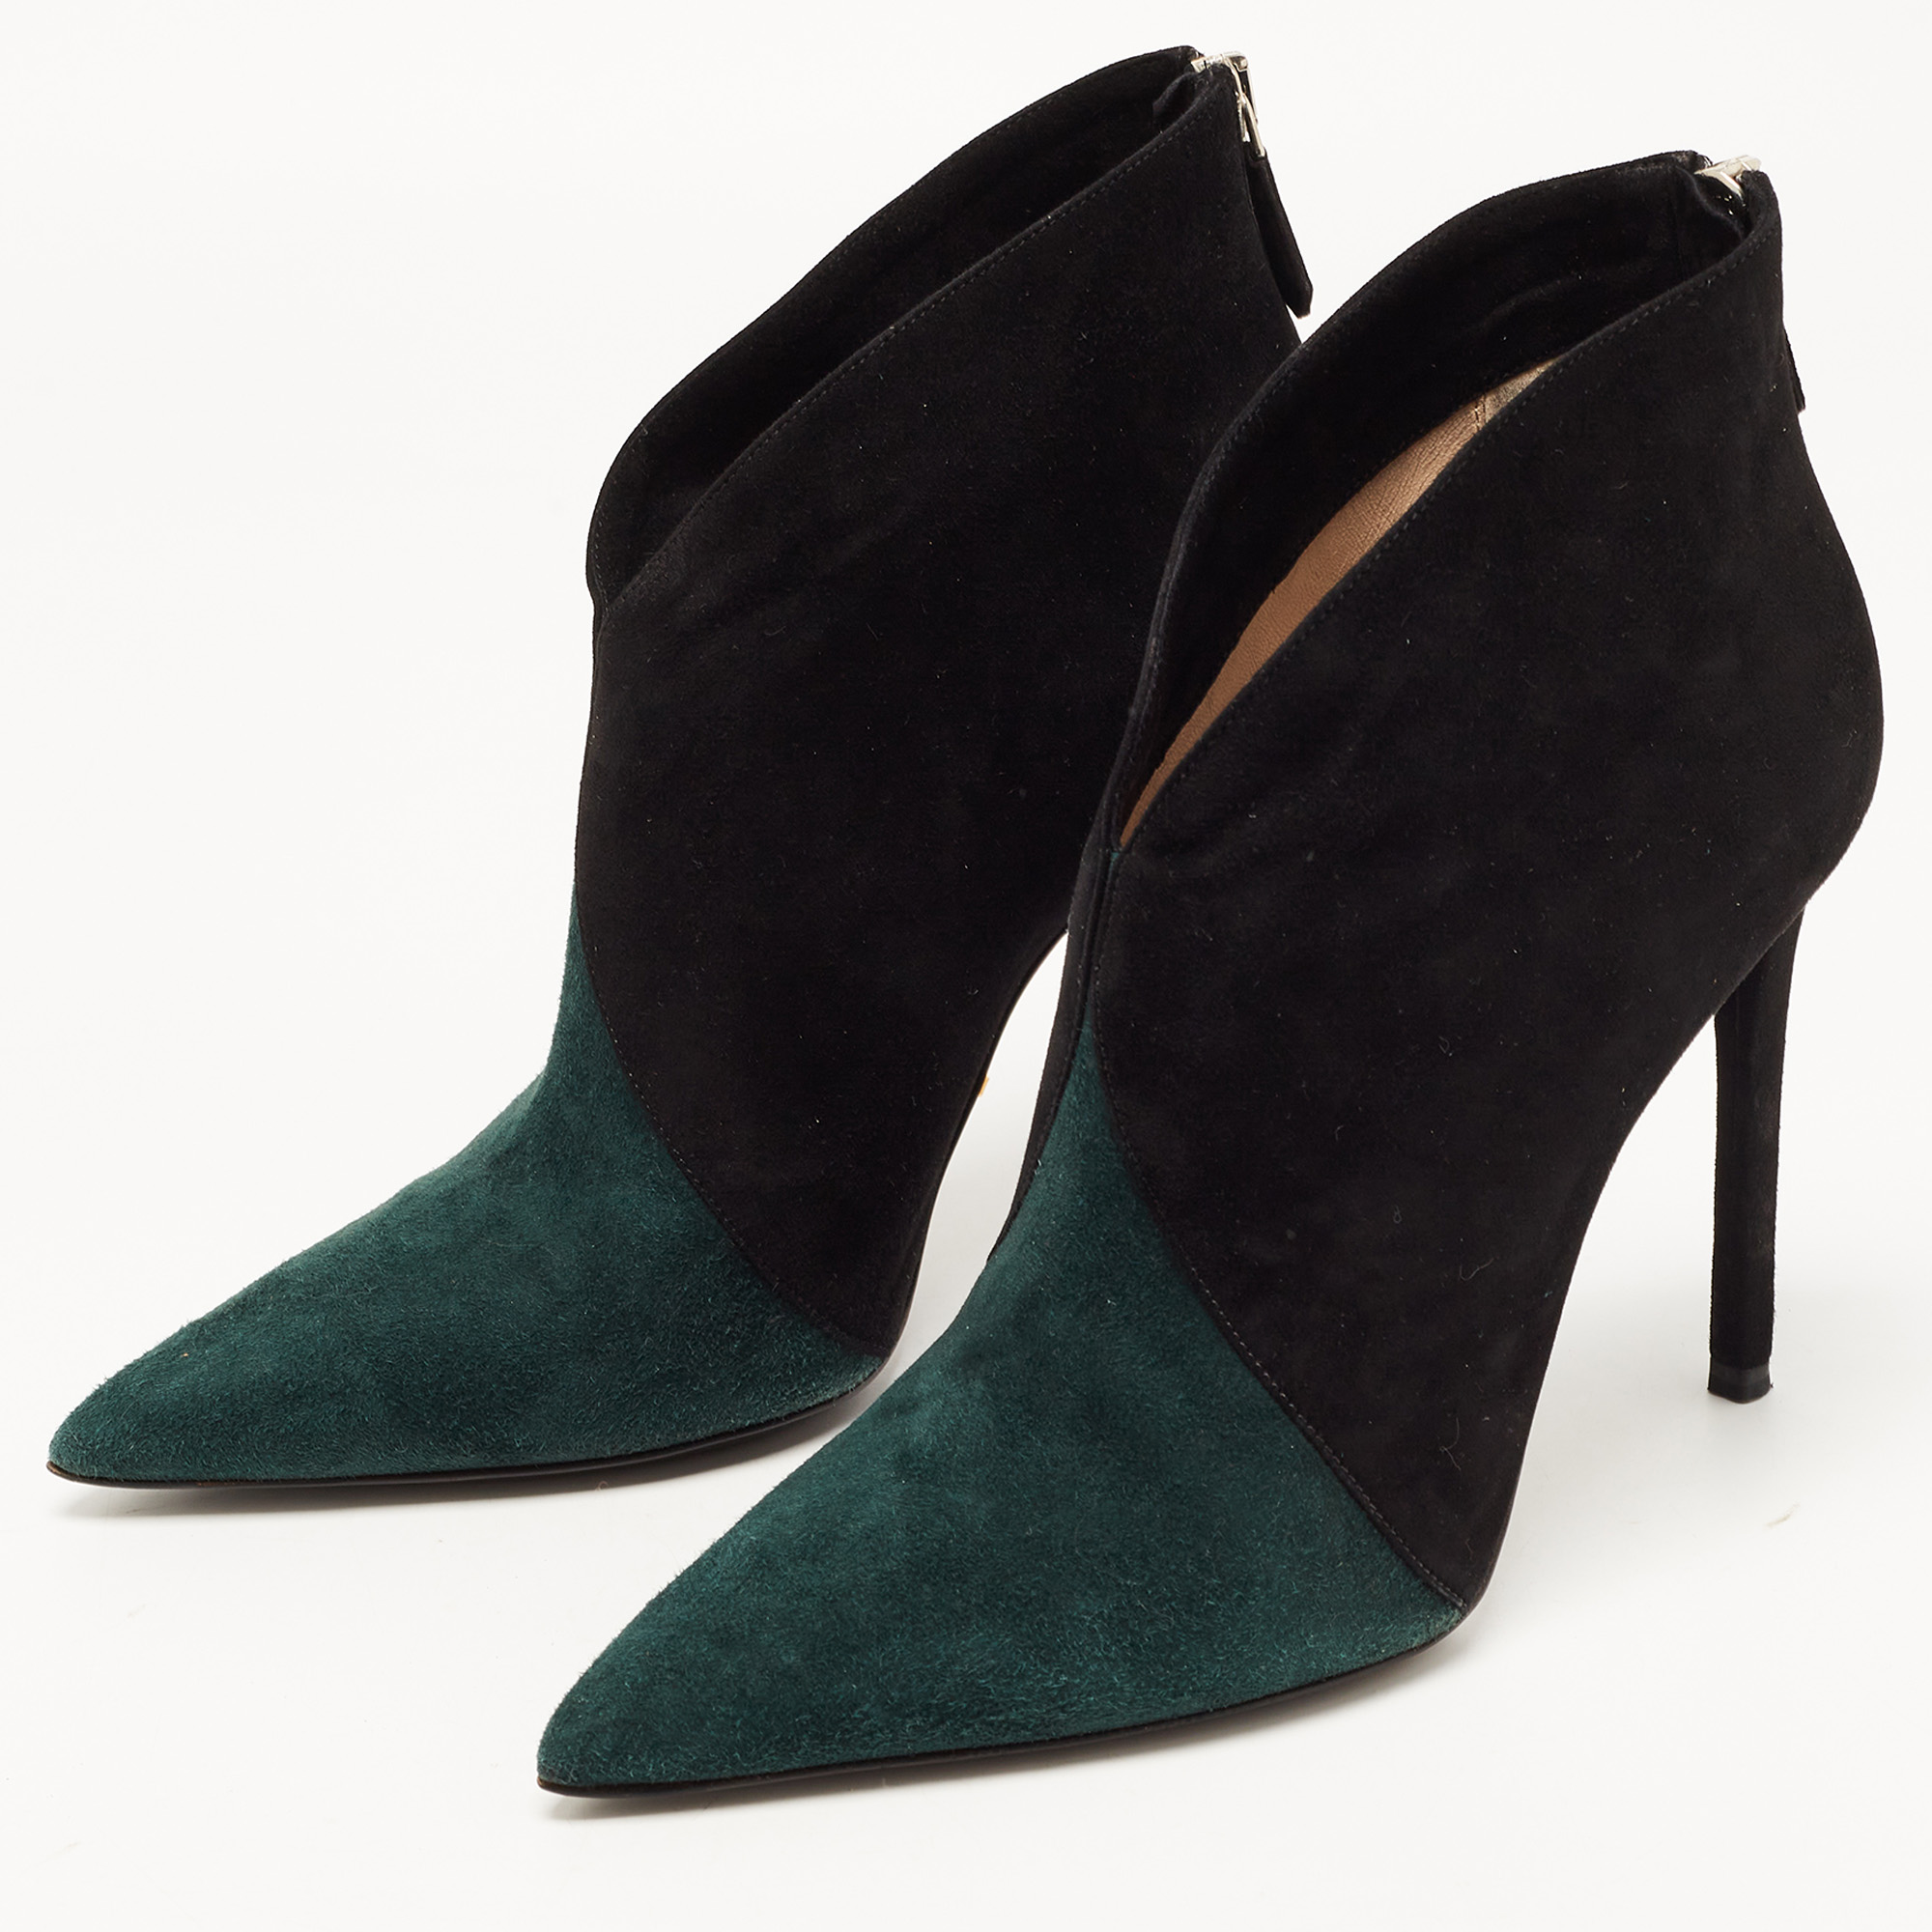 

Prada Black/Green Suede Pointed Toe Ankle Booties Size